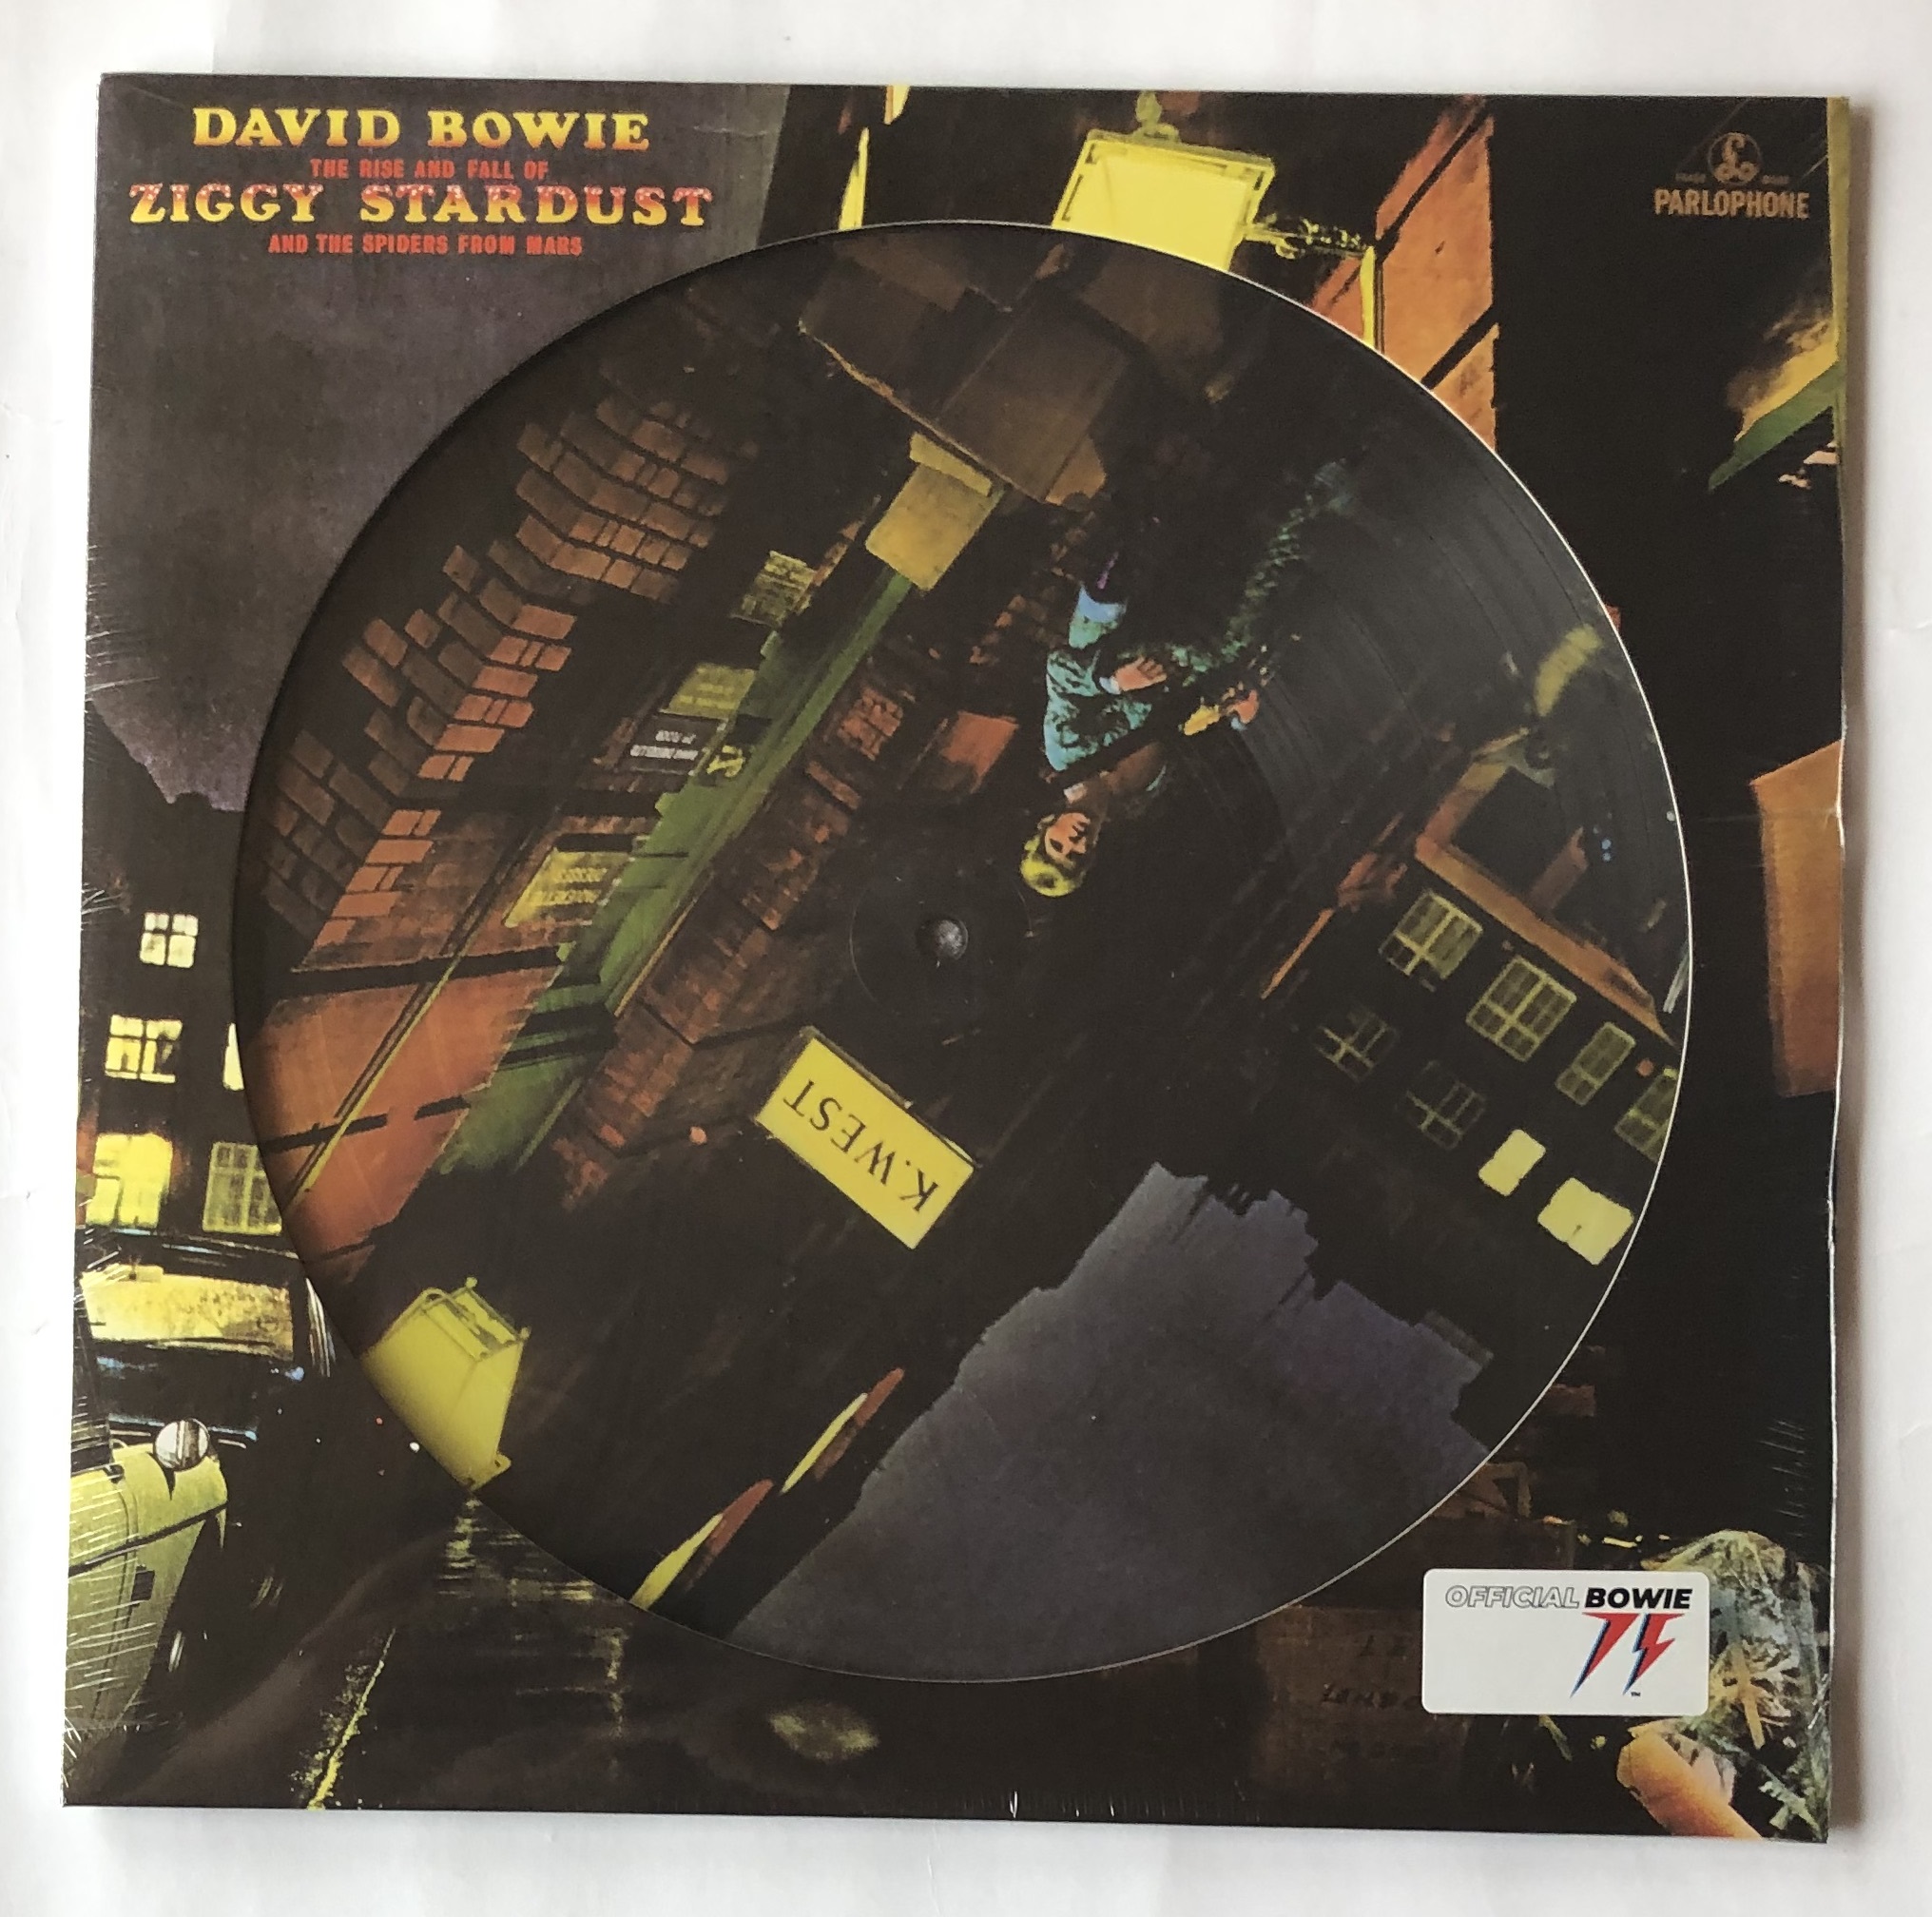 Album The Rise And Fall Of Ziggy Stardust And The Spiders From Mars De David Bowie Sur Cdandlp 5924